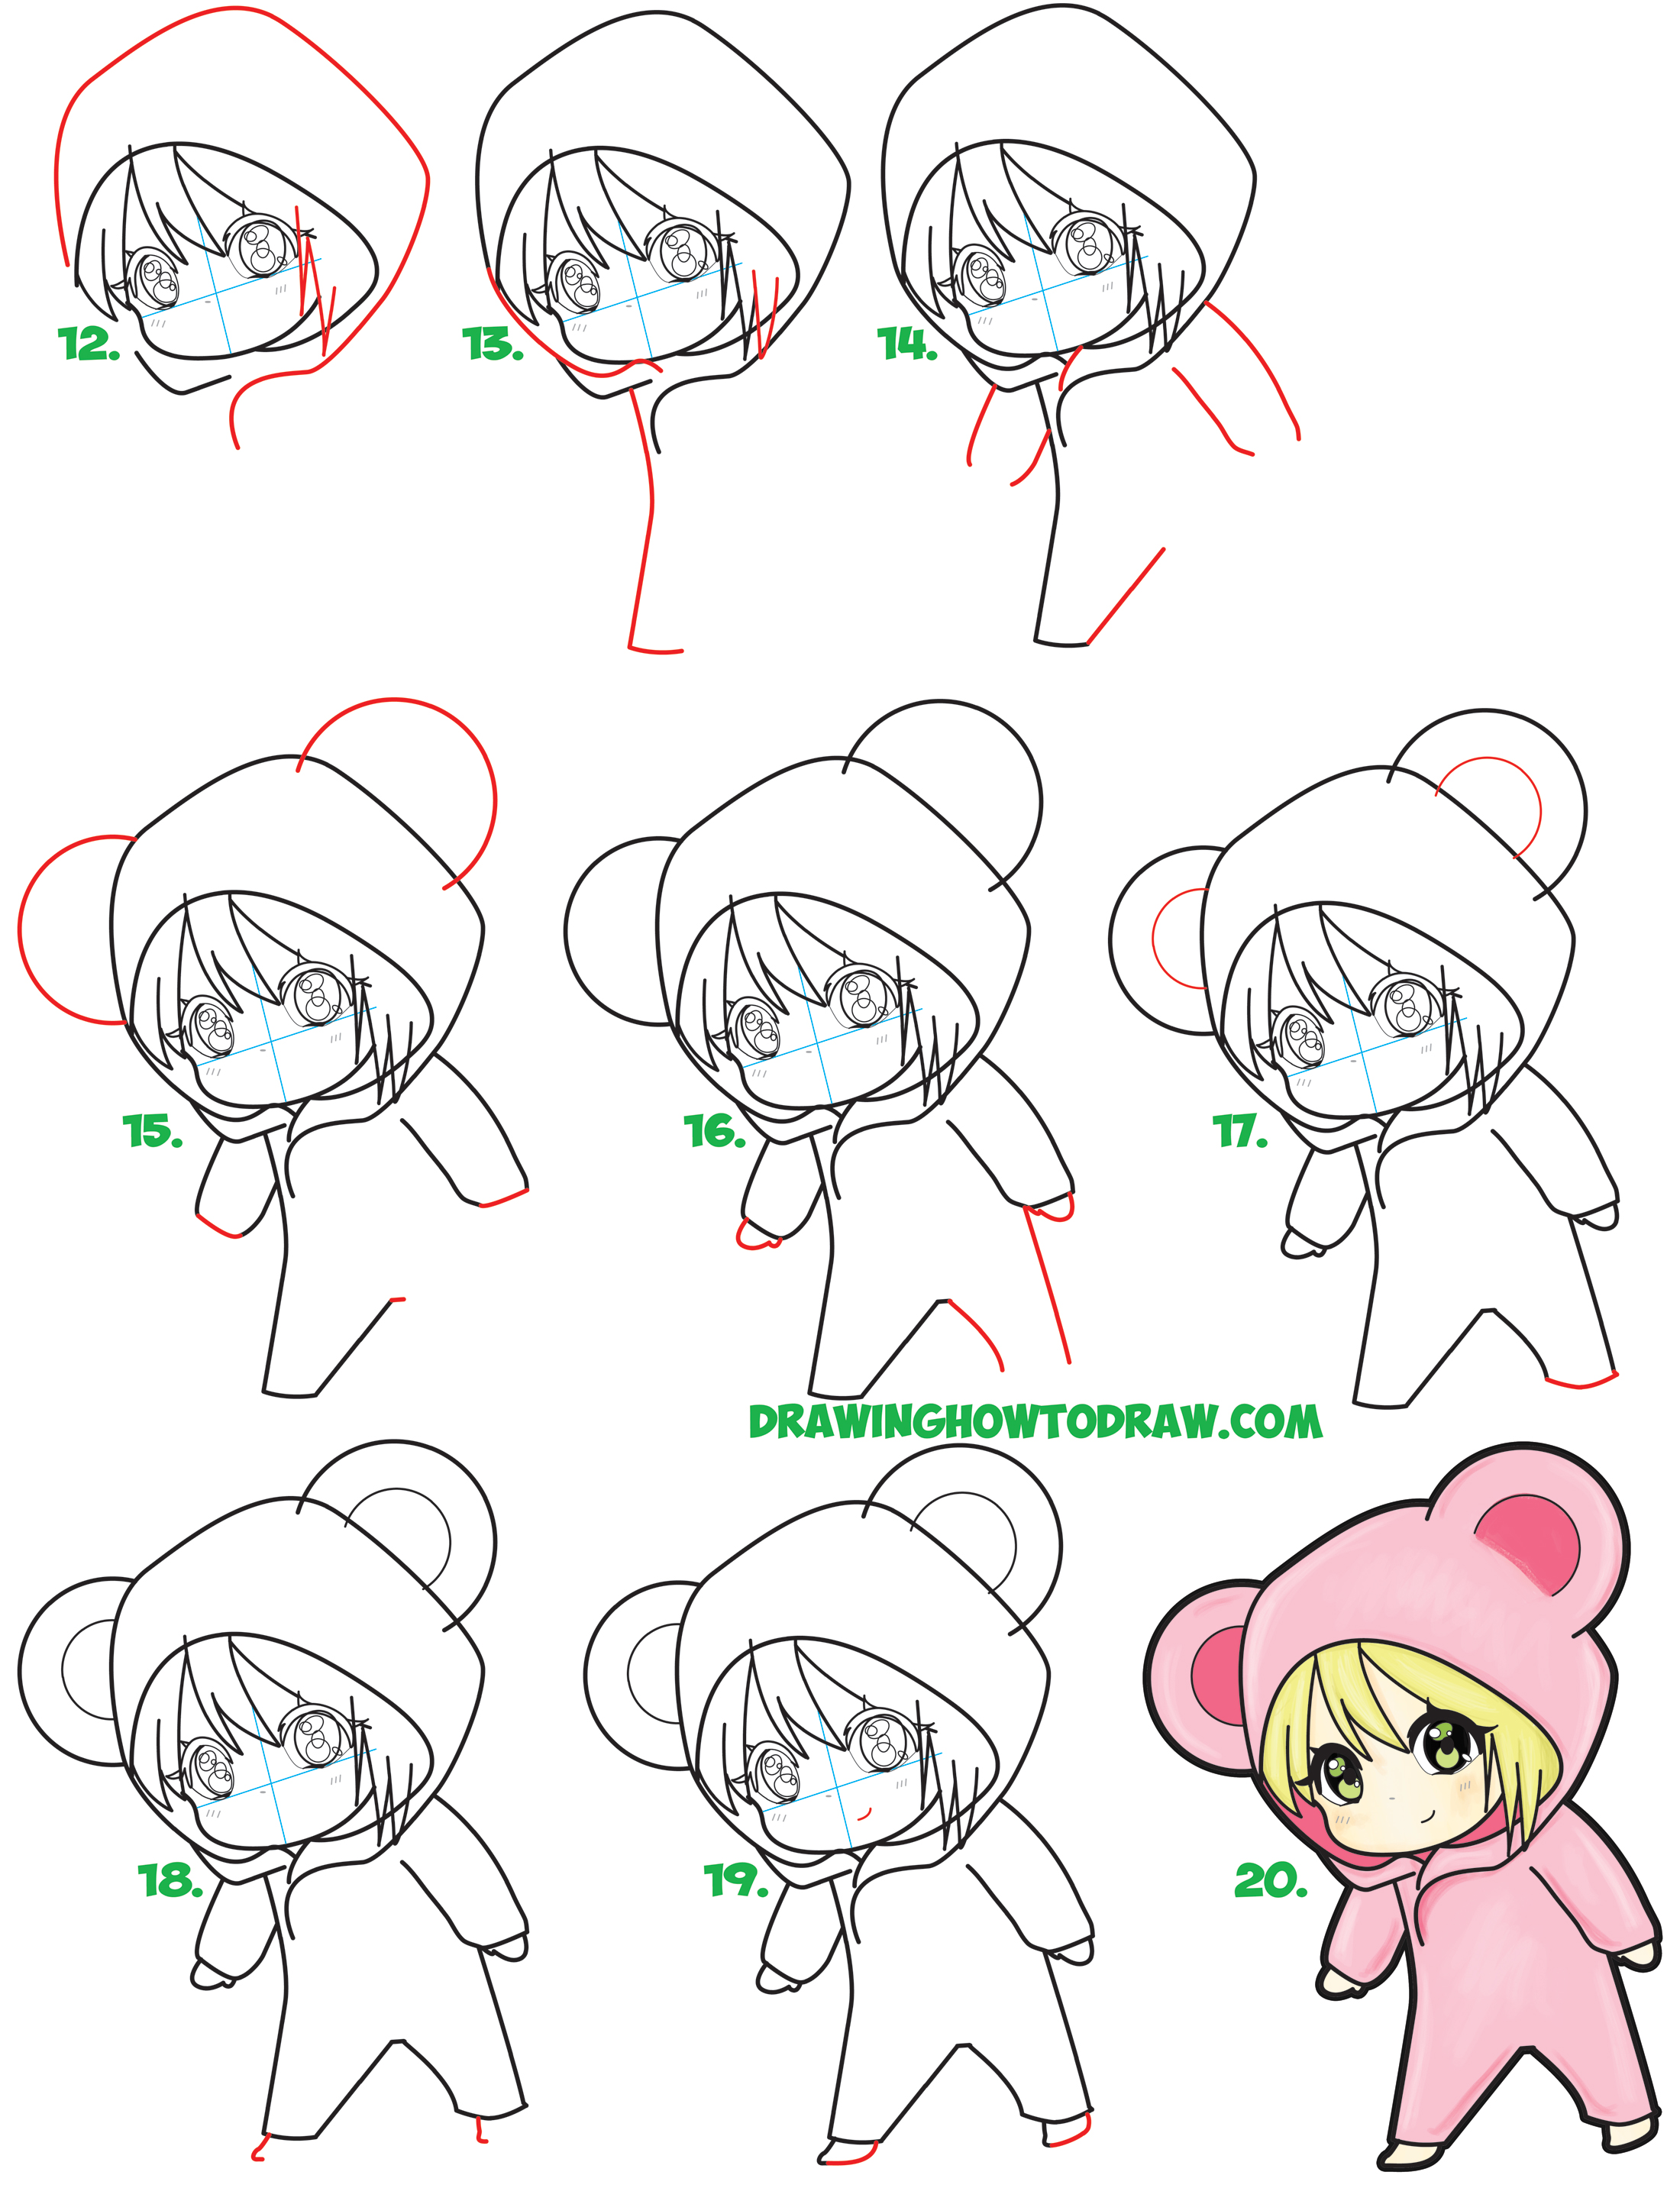 Learn How to Draw a Cute Chibi Girl Dressed in a Hooded Bear Onesie